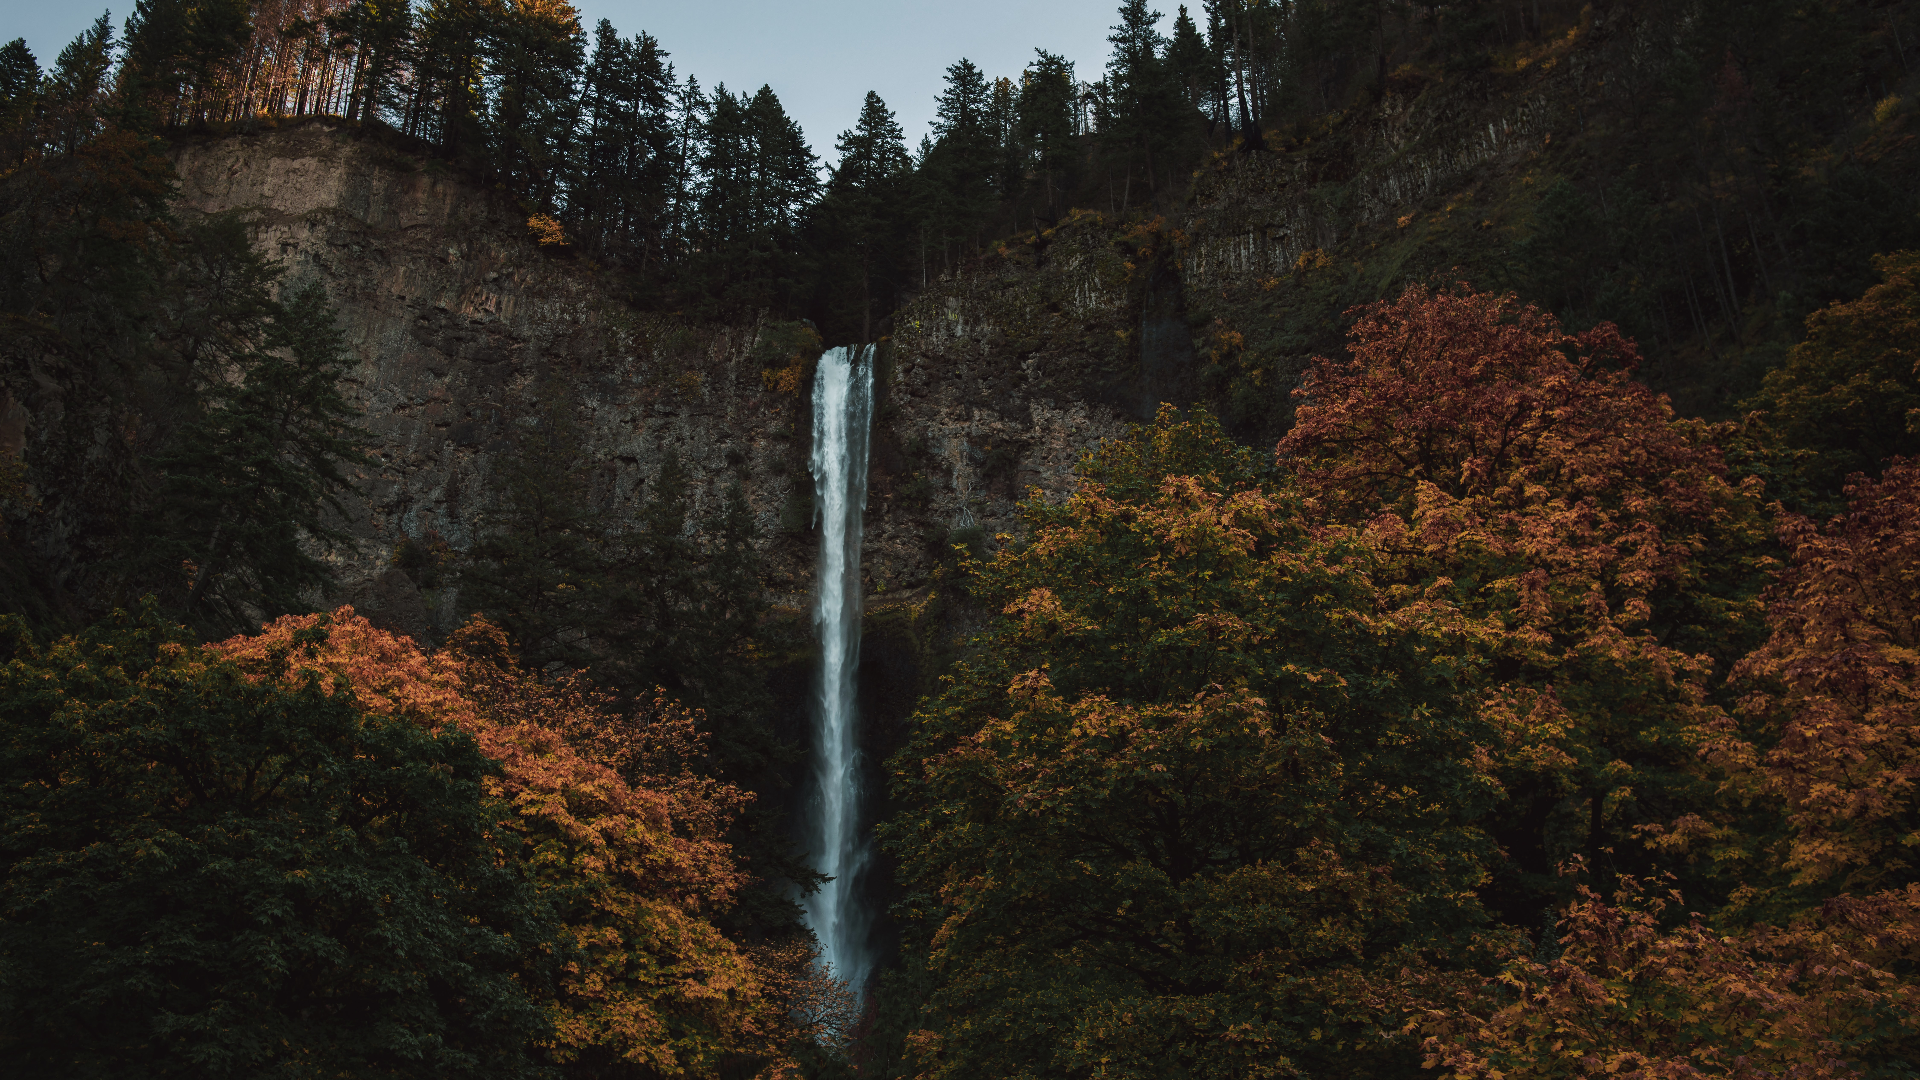 General 1920x1080 nature landscape trees forest water waterfall fall mountains sky Multnomah Falls Oregon USA